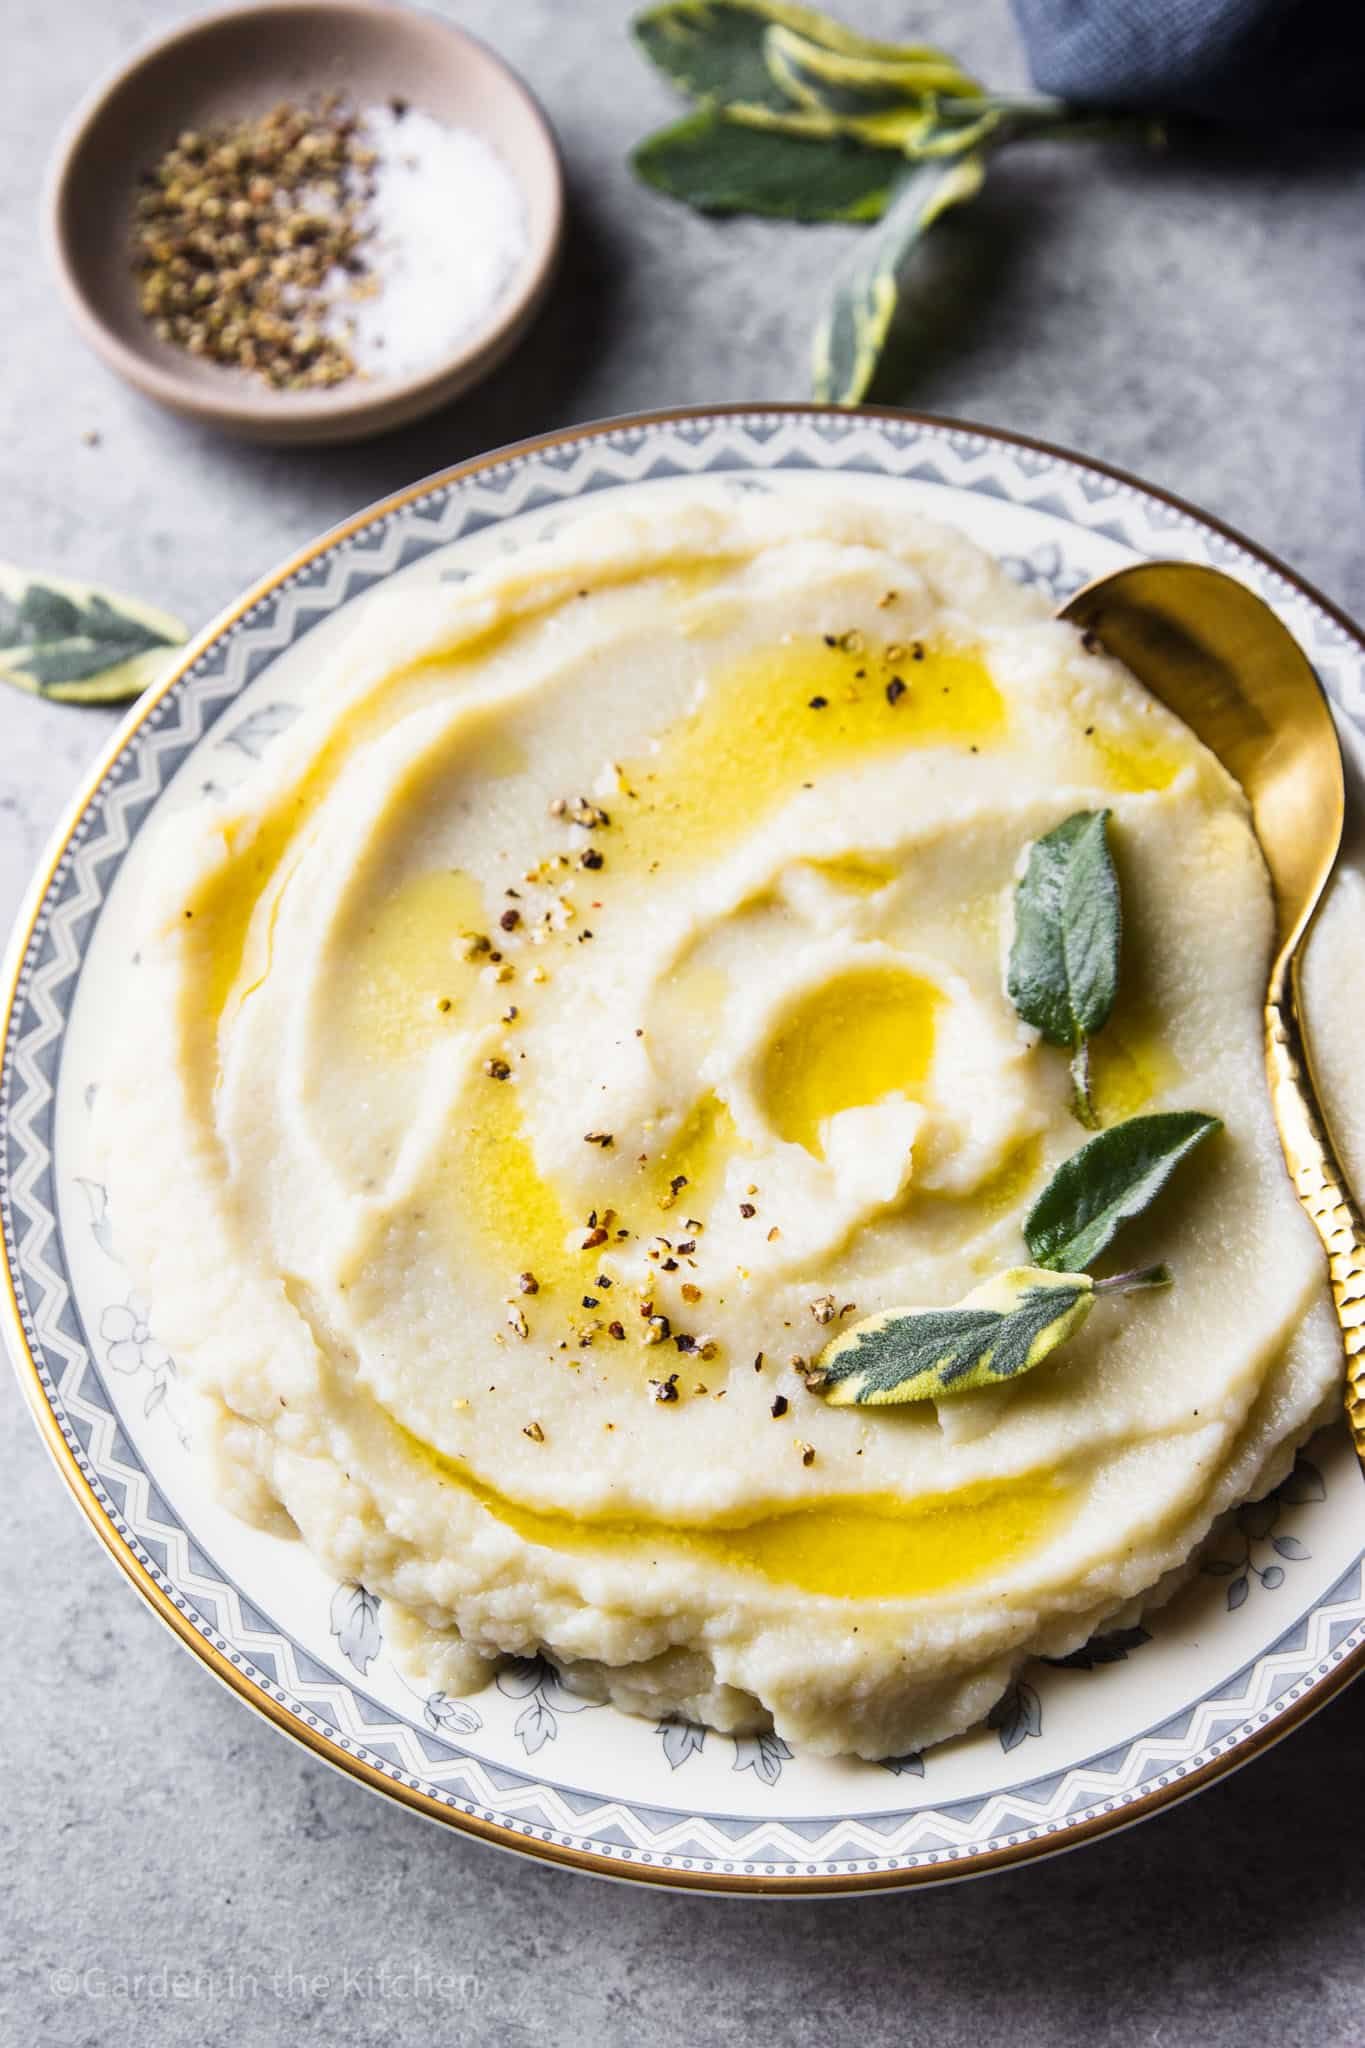 Best cauliflower mashed potato in a round plate with golden and blue details. Cauliflower mash is topped with butter and sage leaves. 